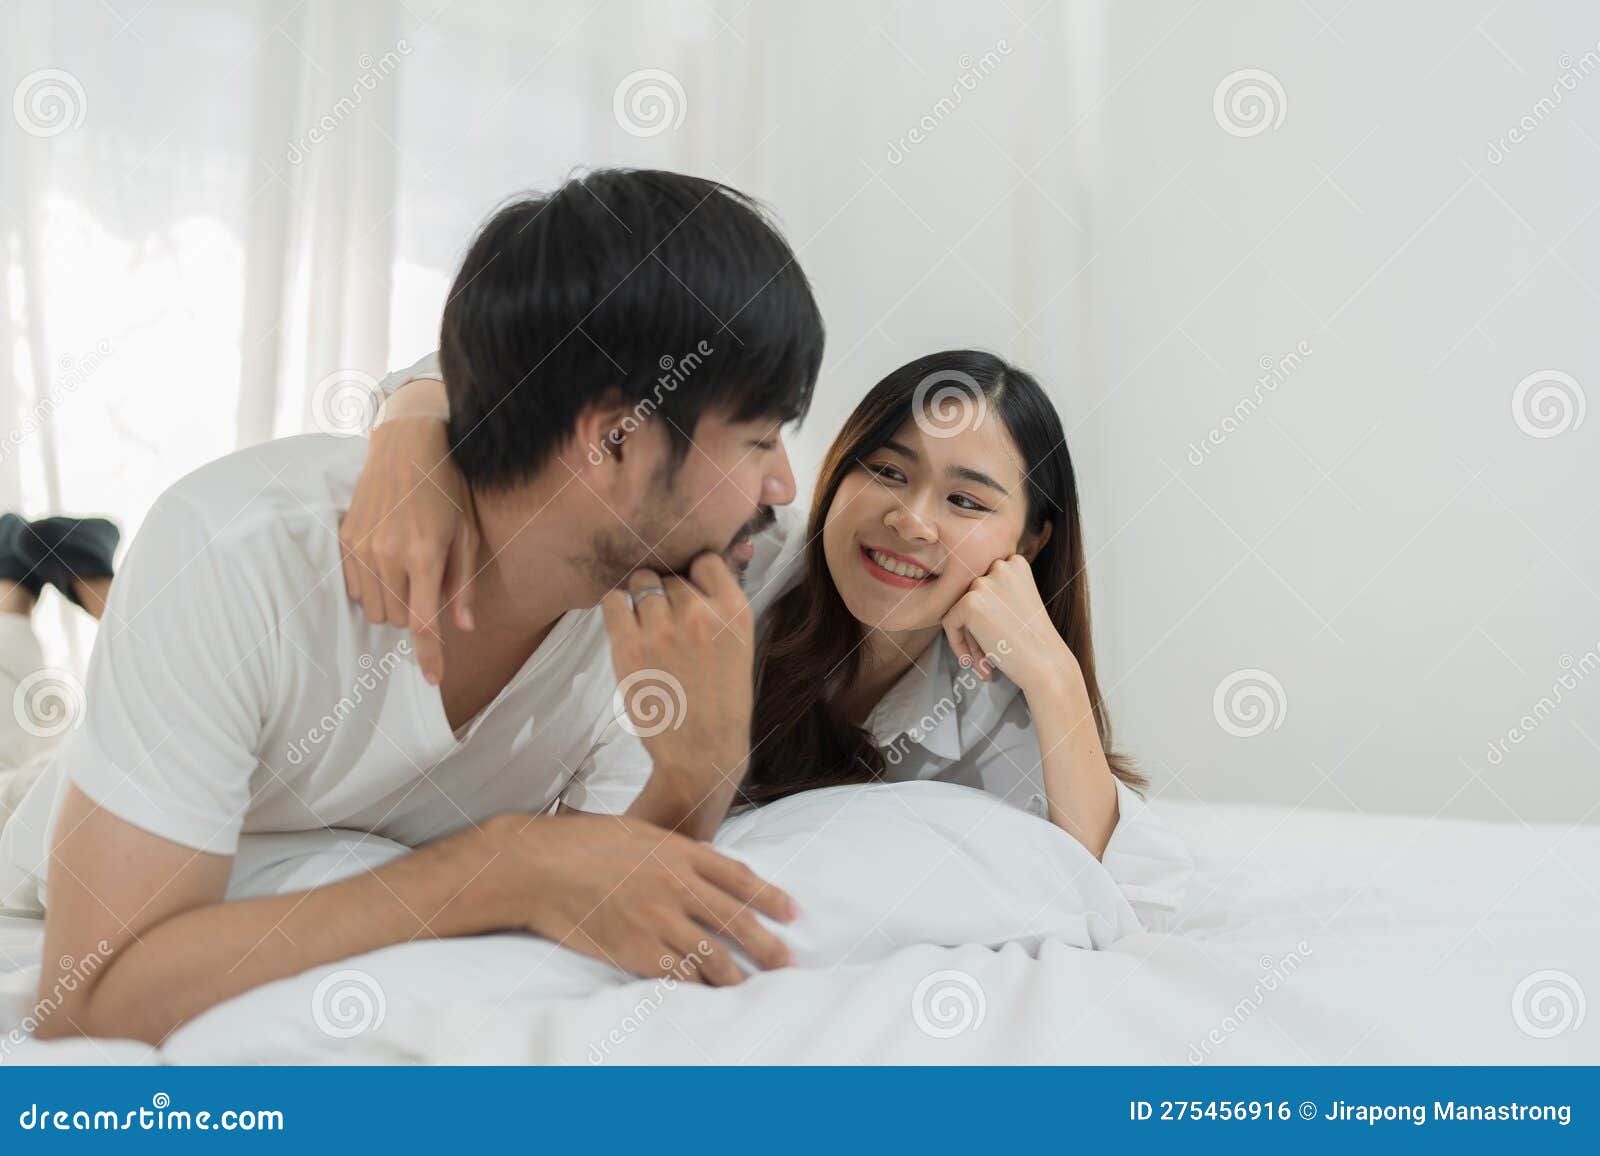 Asian Romantic Couple in Bed Enjoying Sensual Foreplay Happy Sensual Young  Couple Lying in Bed Together. Beautiful Stock Photo - Image of boyfriend,  hotel: 275456916